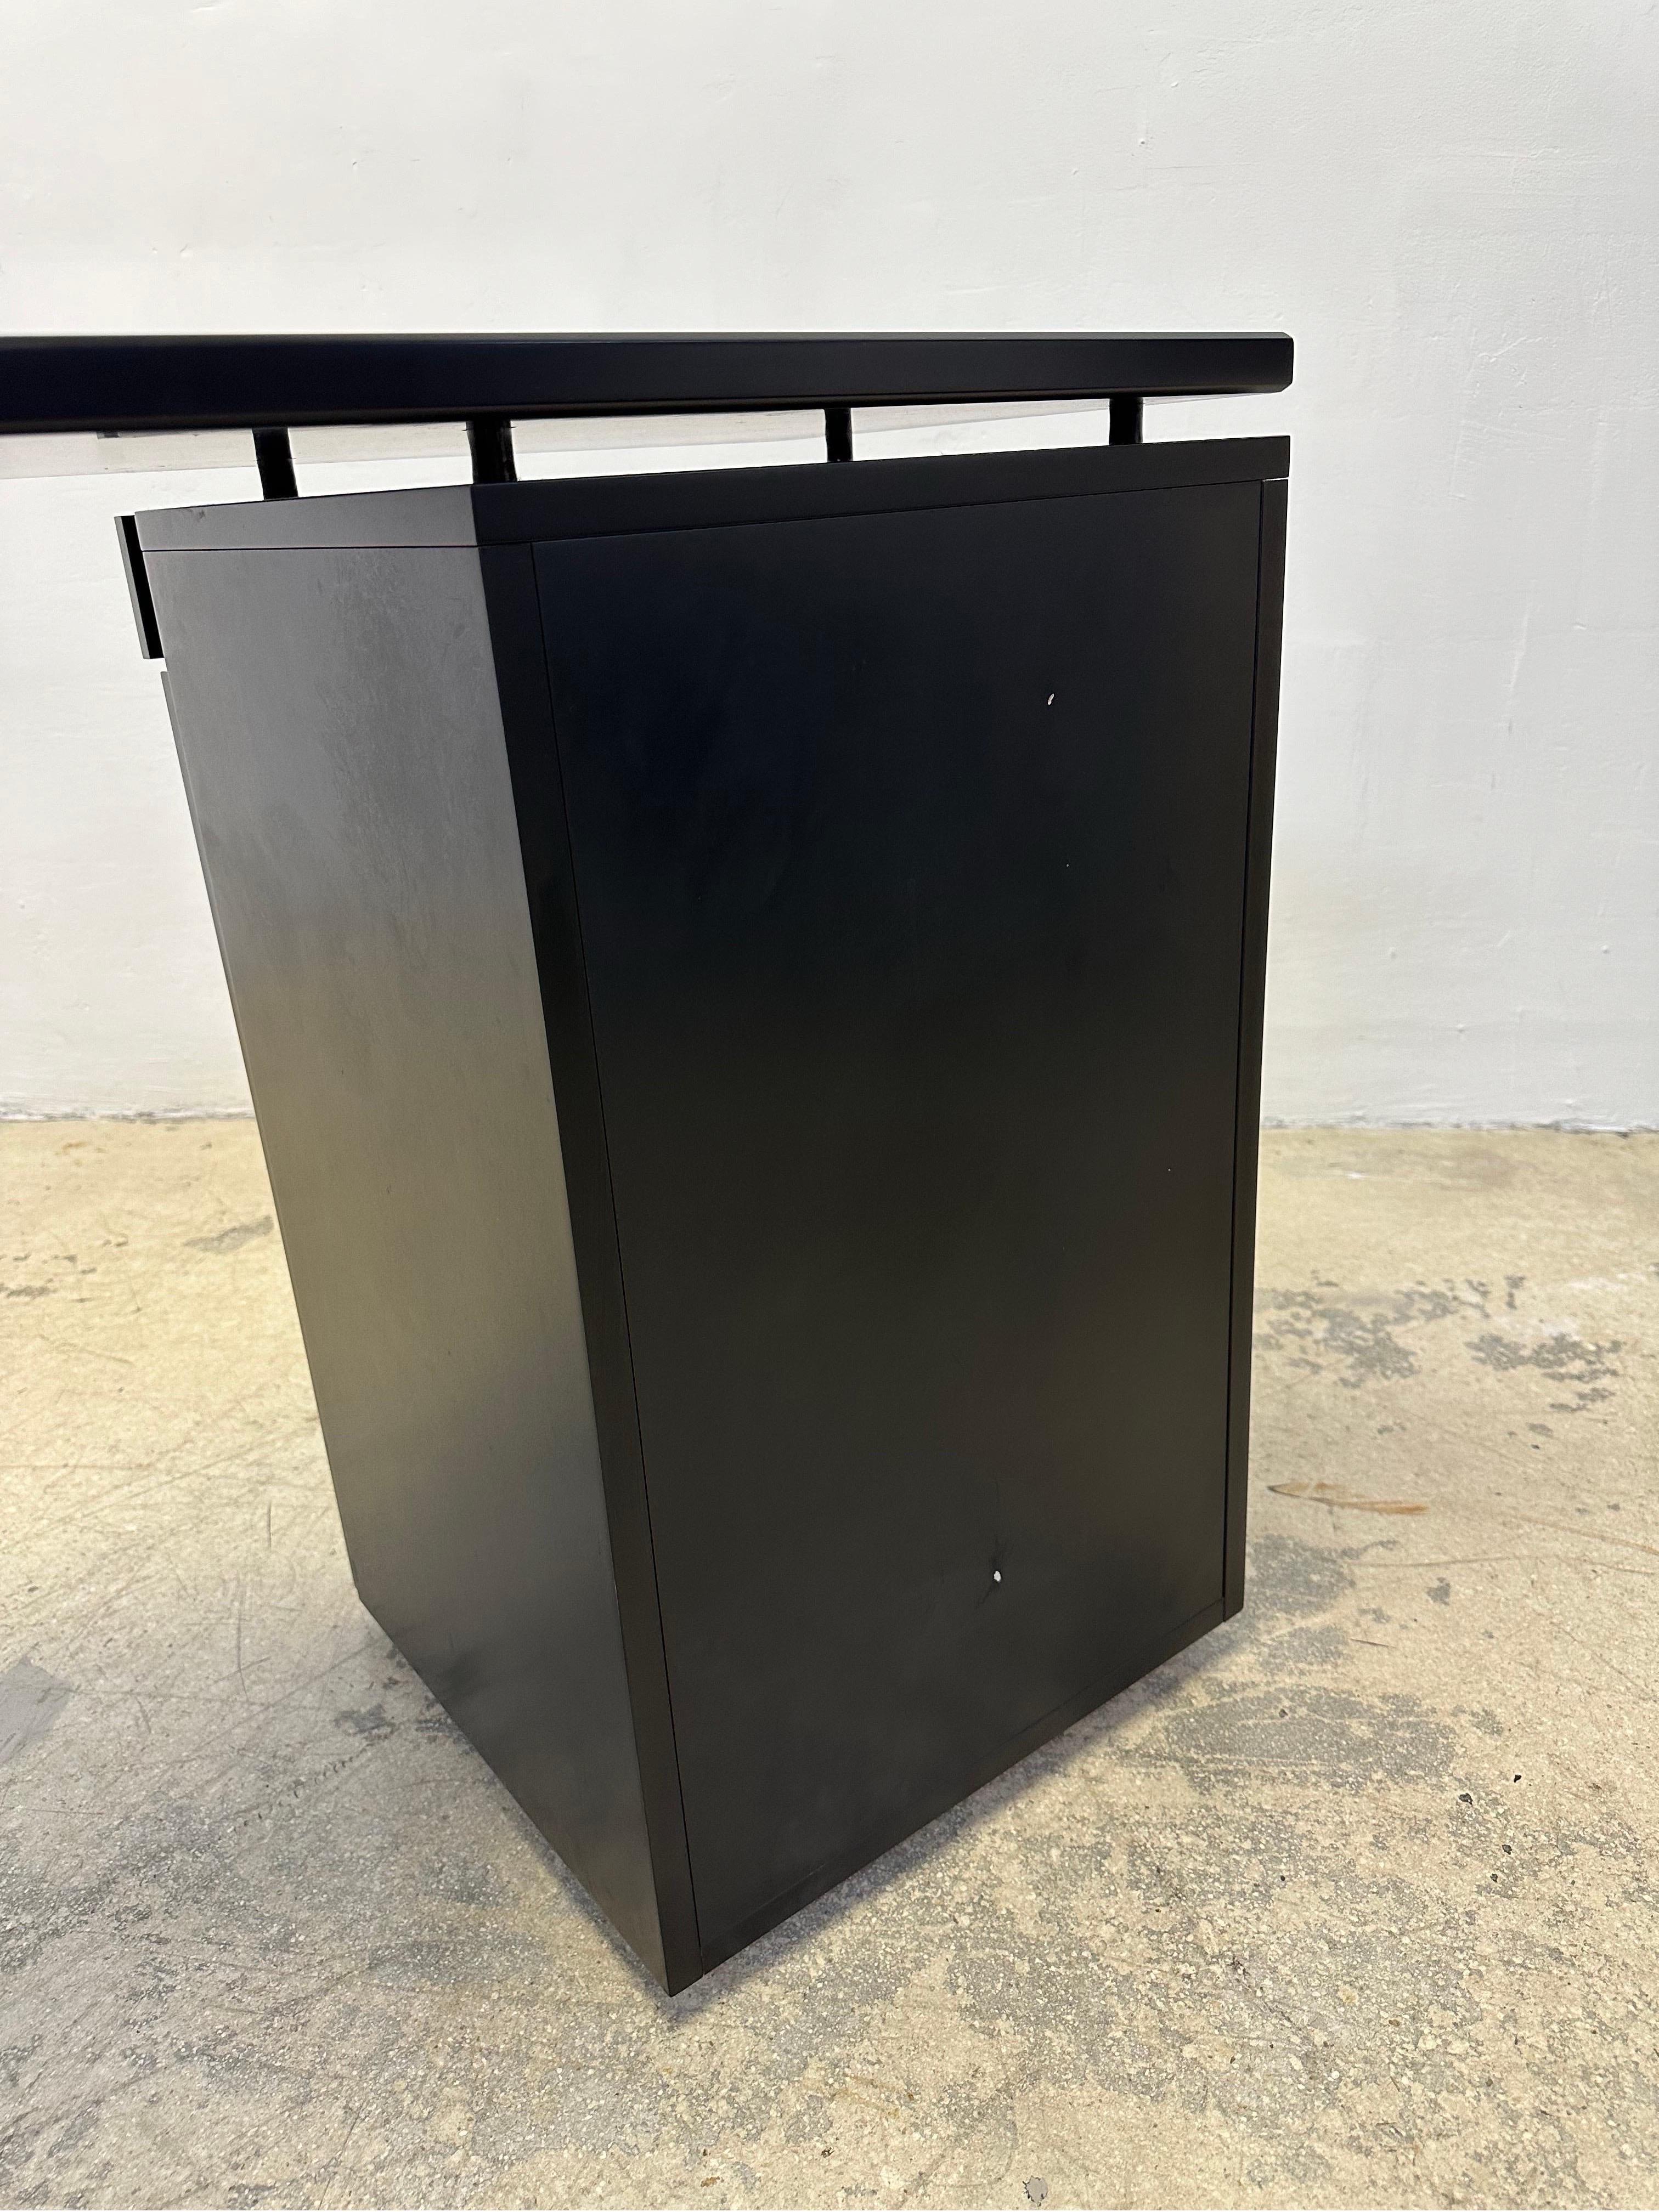 Postmodern Black Lacquered Desk by Interlubke, Germany 1980s For Sale 6